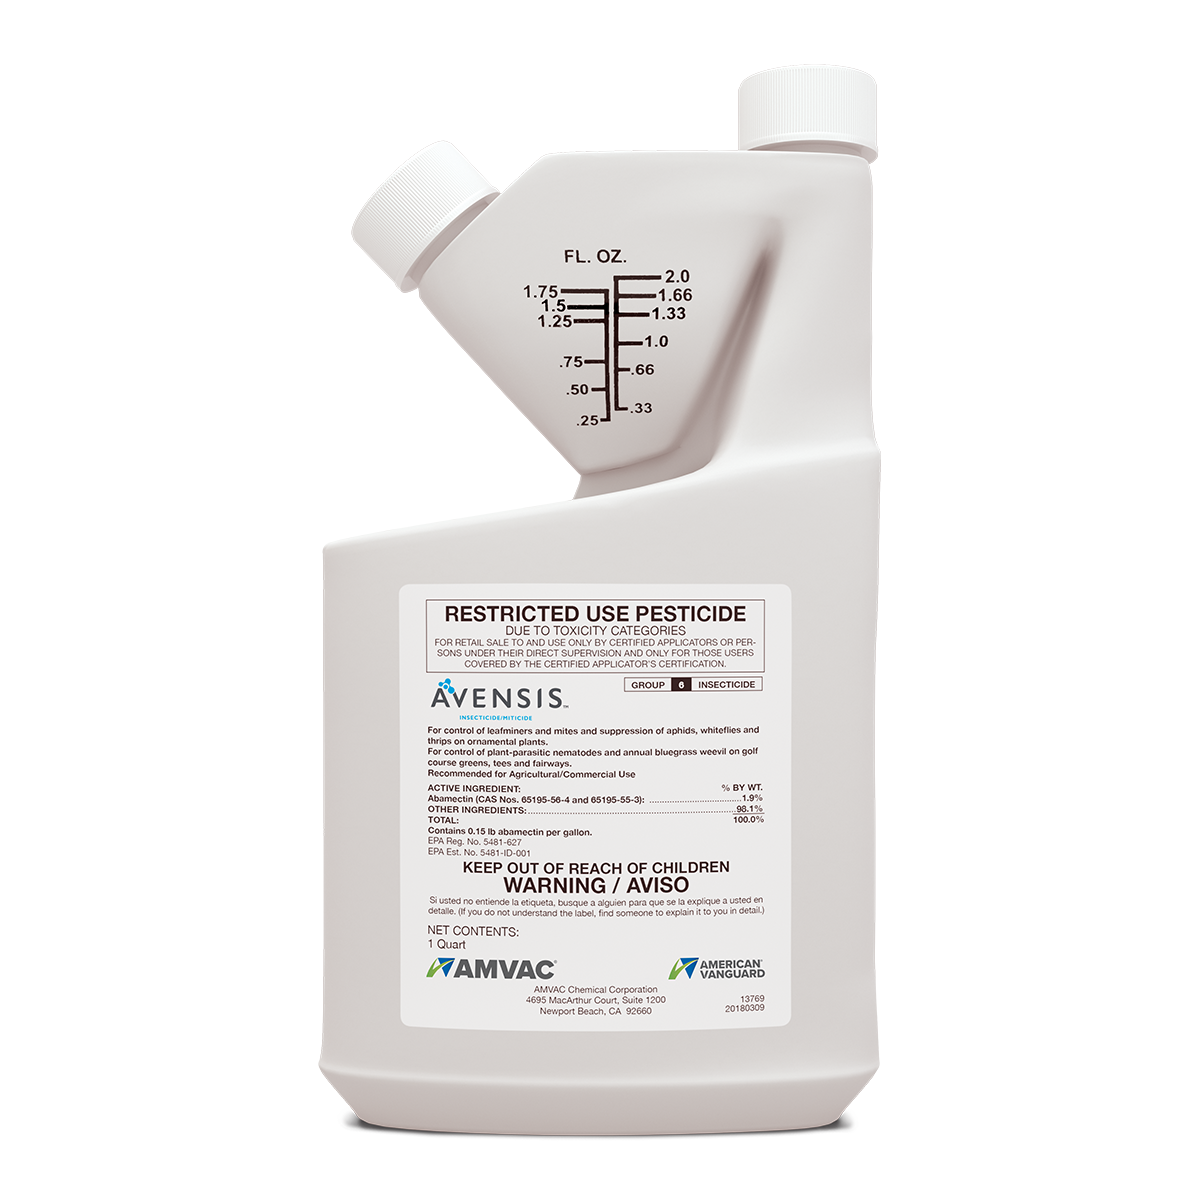 AVENSIS® INSECTICIDE/<wbr>MITICIDEProduct Image